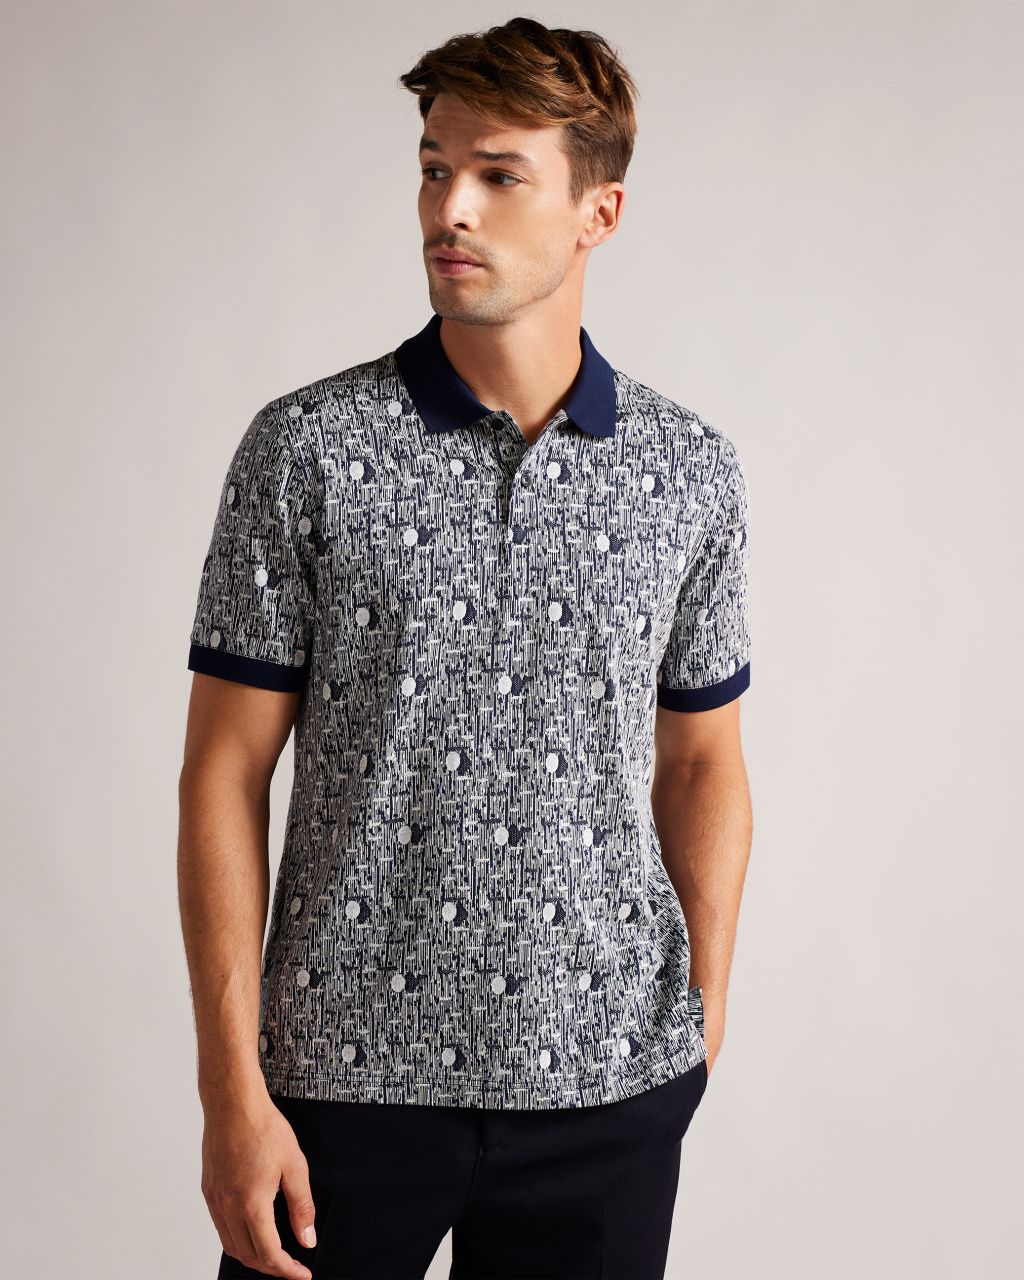 Ted Baker Men's Geometric Knit Polo Shirt in Navy-Blue, Coreo, Cotton